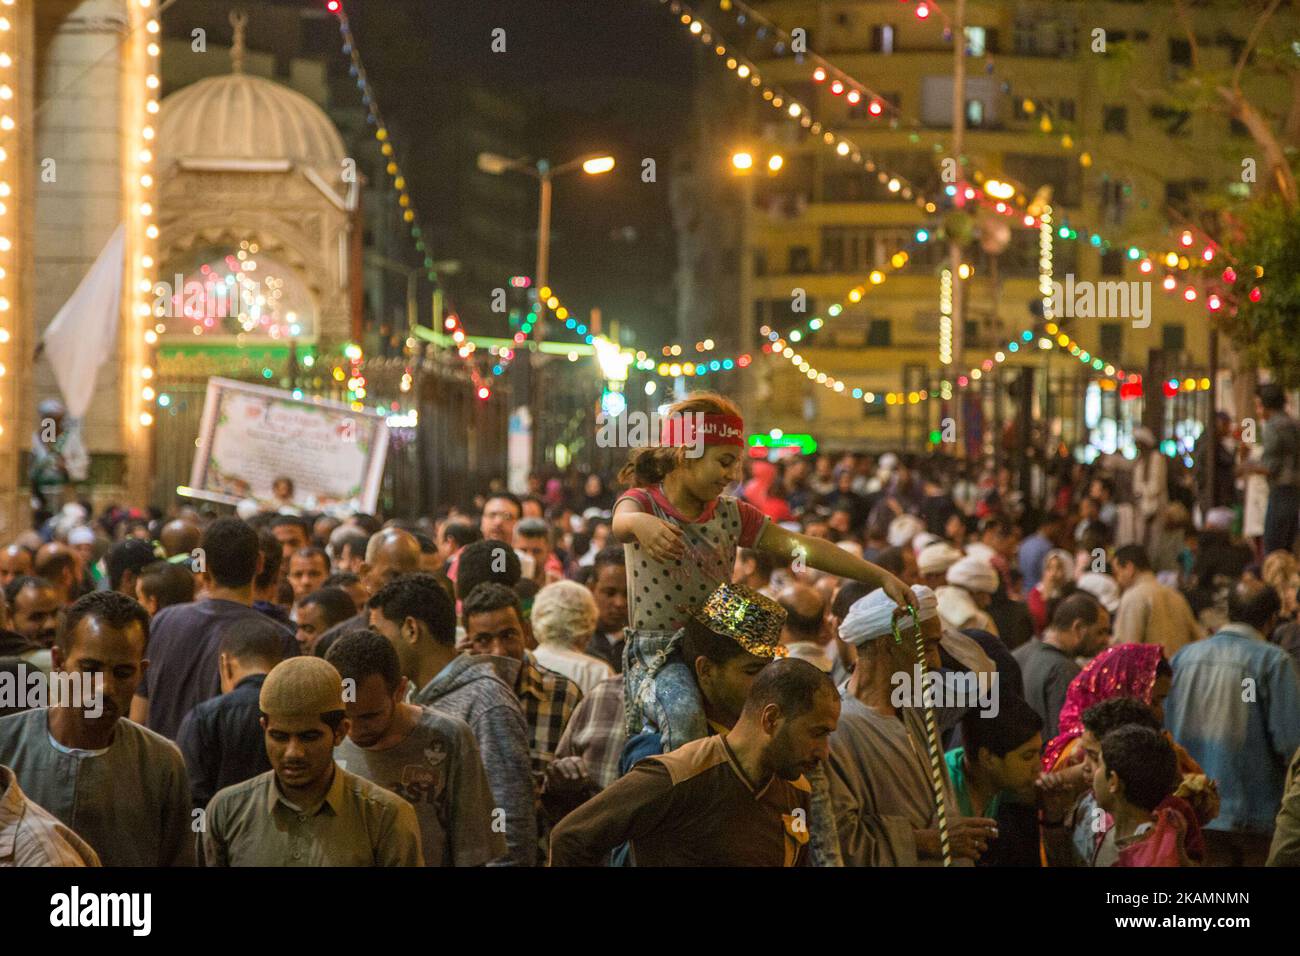 Egyptian Sufi Muslims celebrate the birth anniversary of Al Sayeda Zainab, grand daughter of Prophet Muhammad, outside the Al Sayeda Zainab Mosque in Cairo, Egypt on April 25, 2017. According to the Sufis the mosque contains the grave of Al Sayeda Zainab. (Photo by Ibrahim Ezzat/NurPhoto) *** Please Use Credit from Credit Field *** Stock Photo